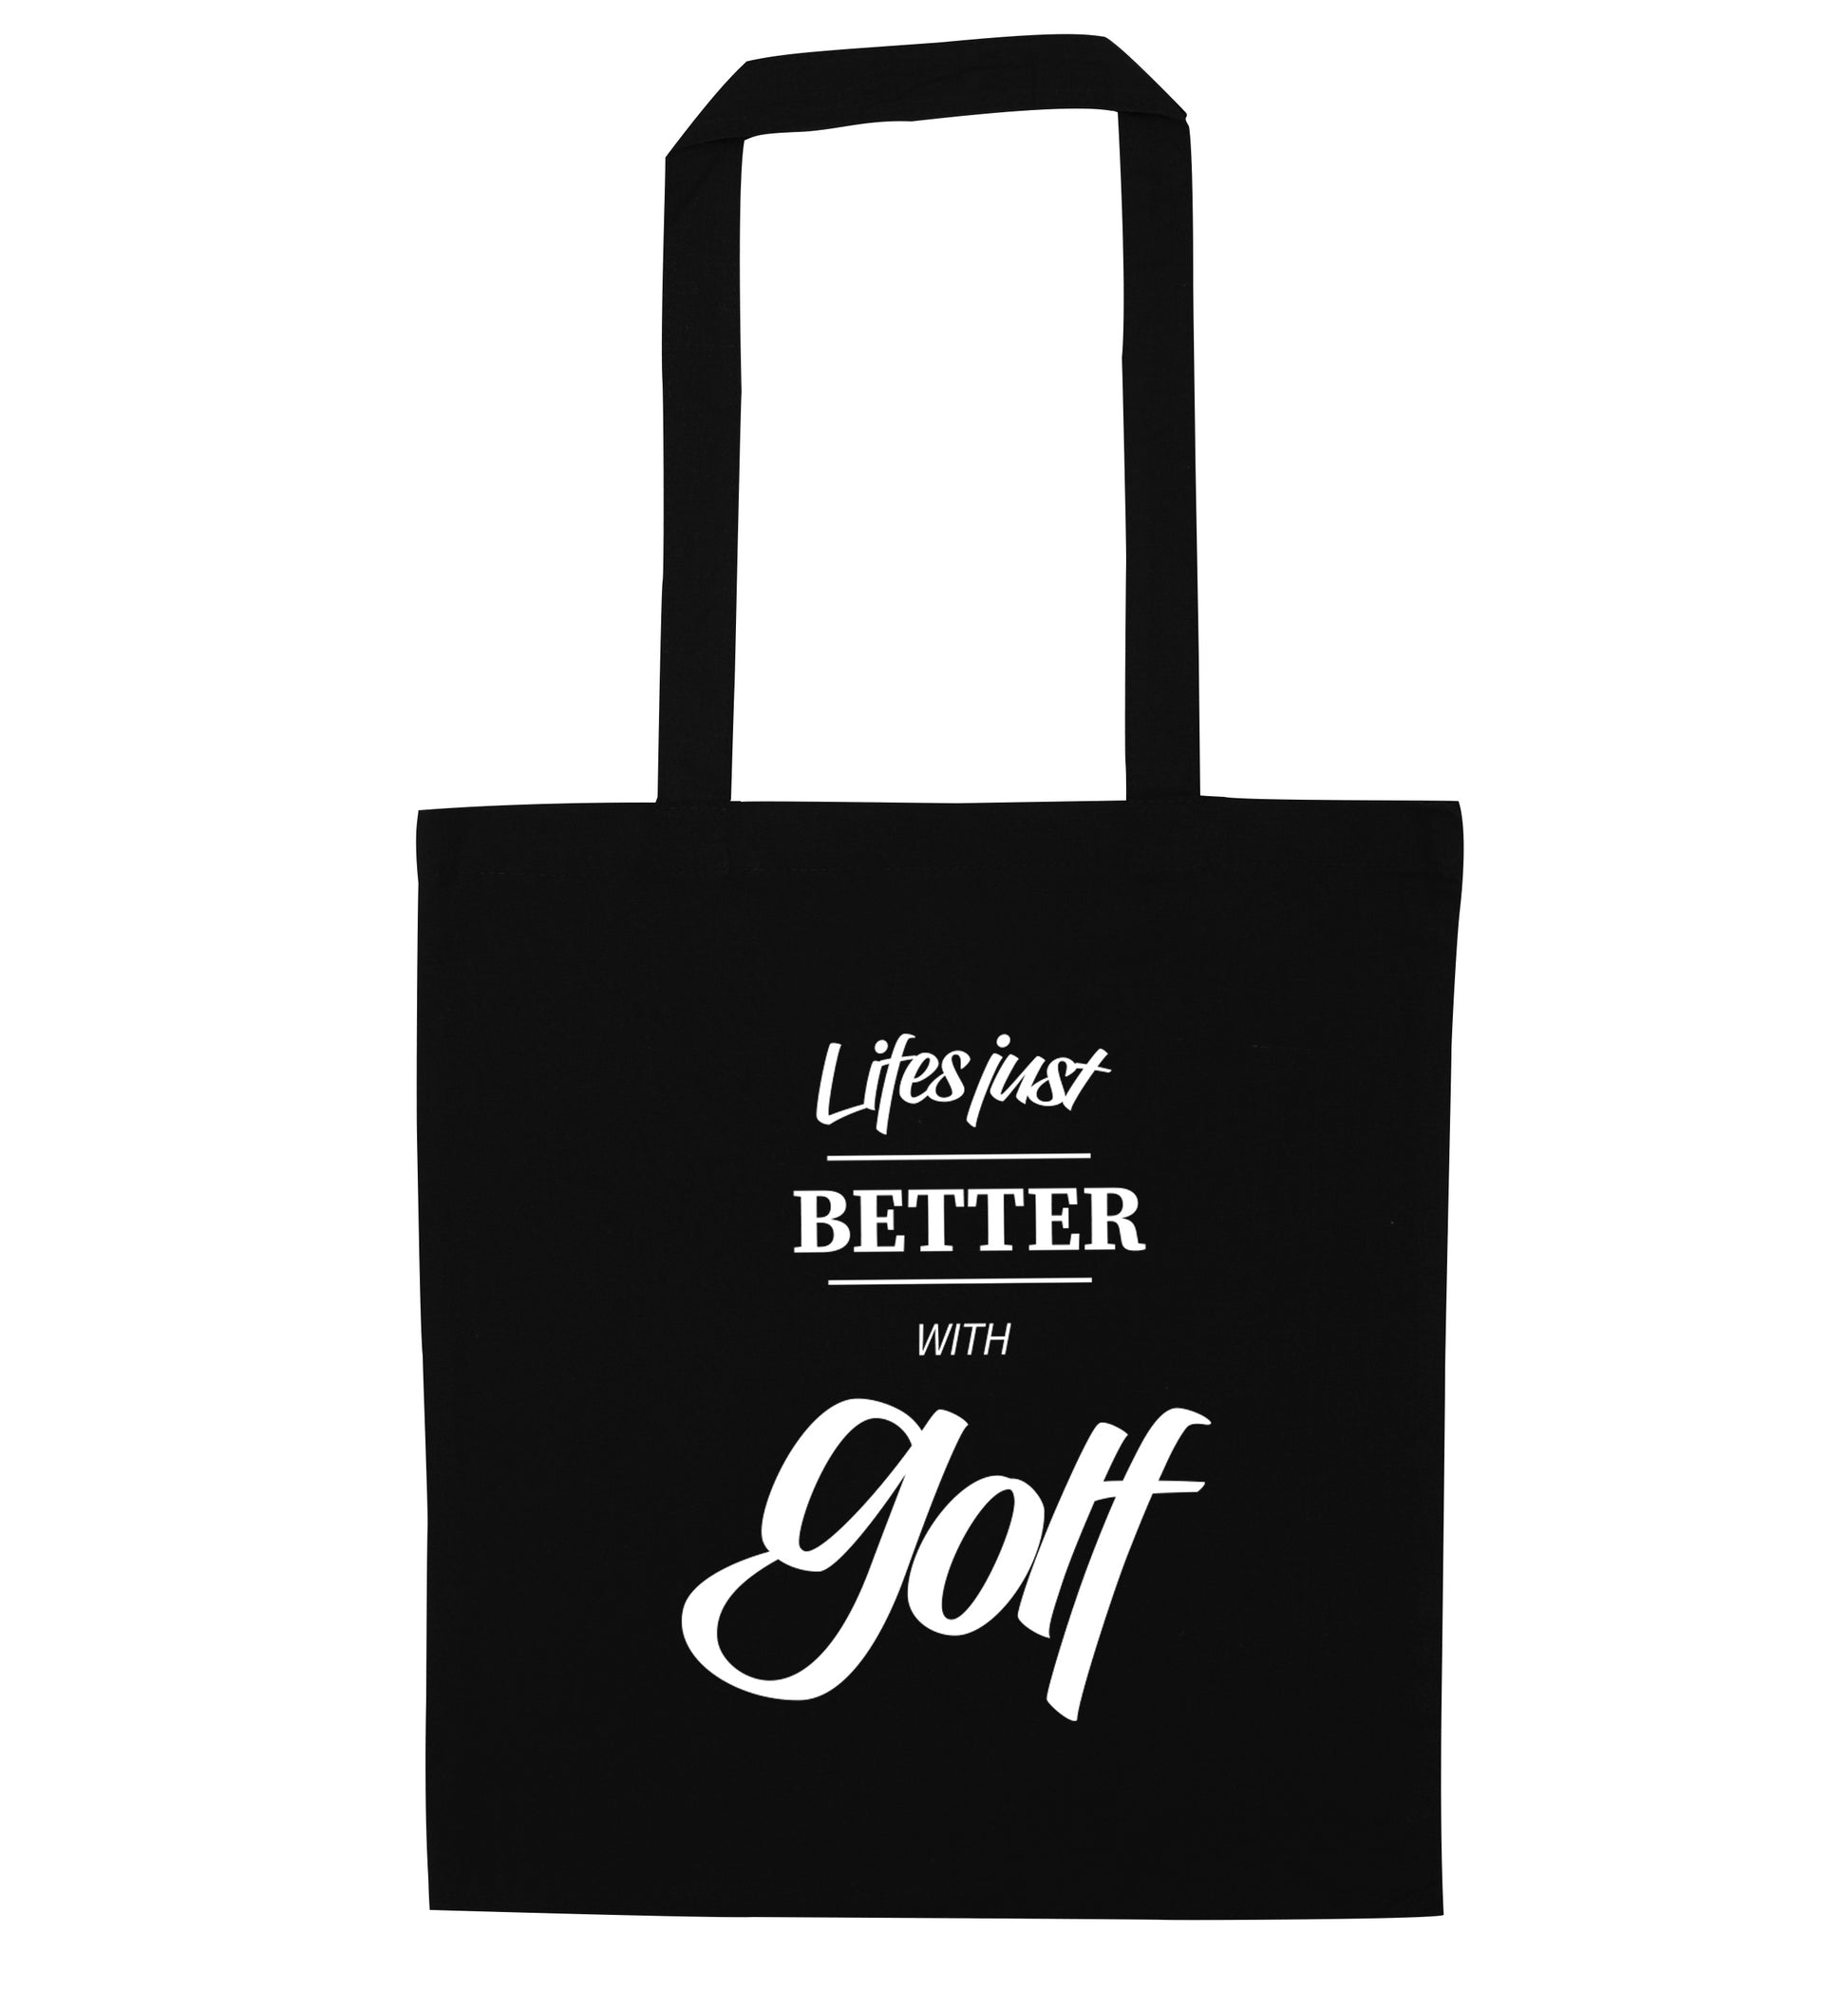 Life is better with golf black tote bag